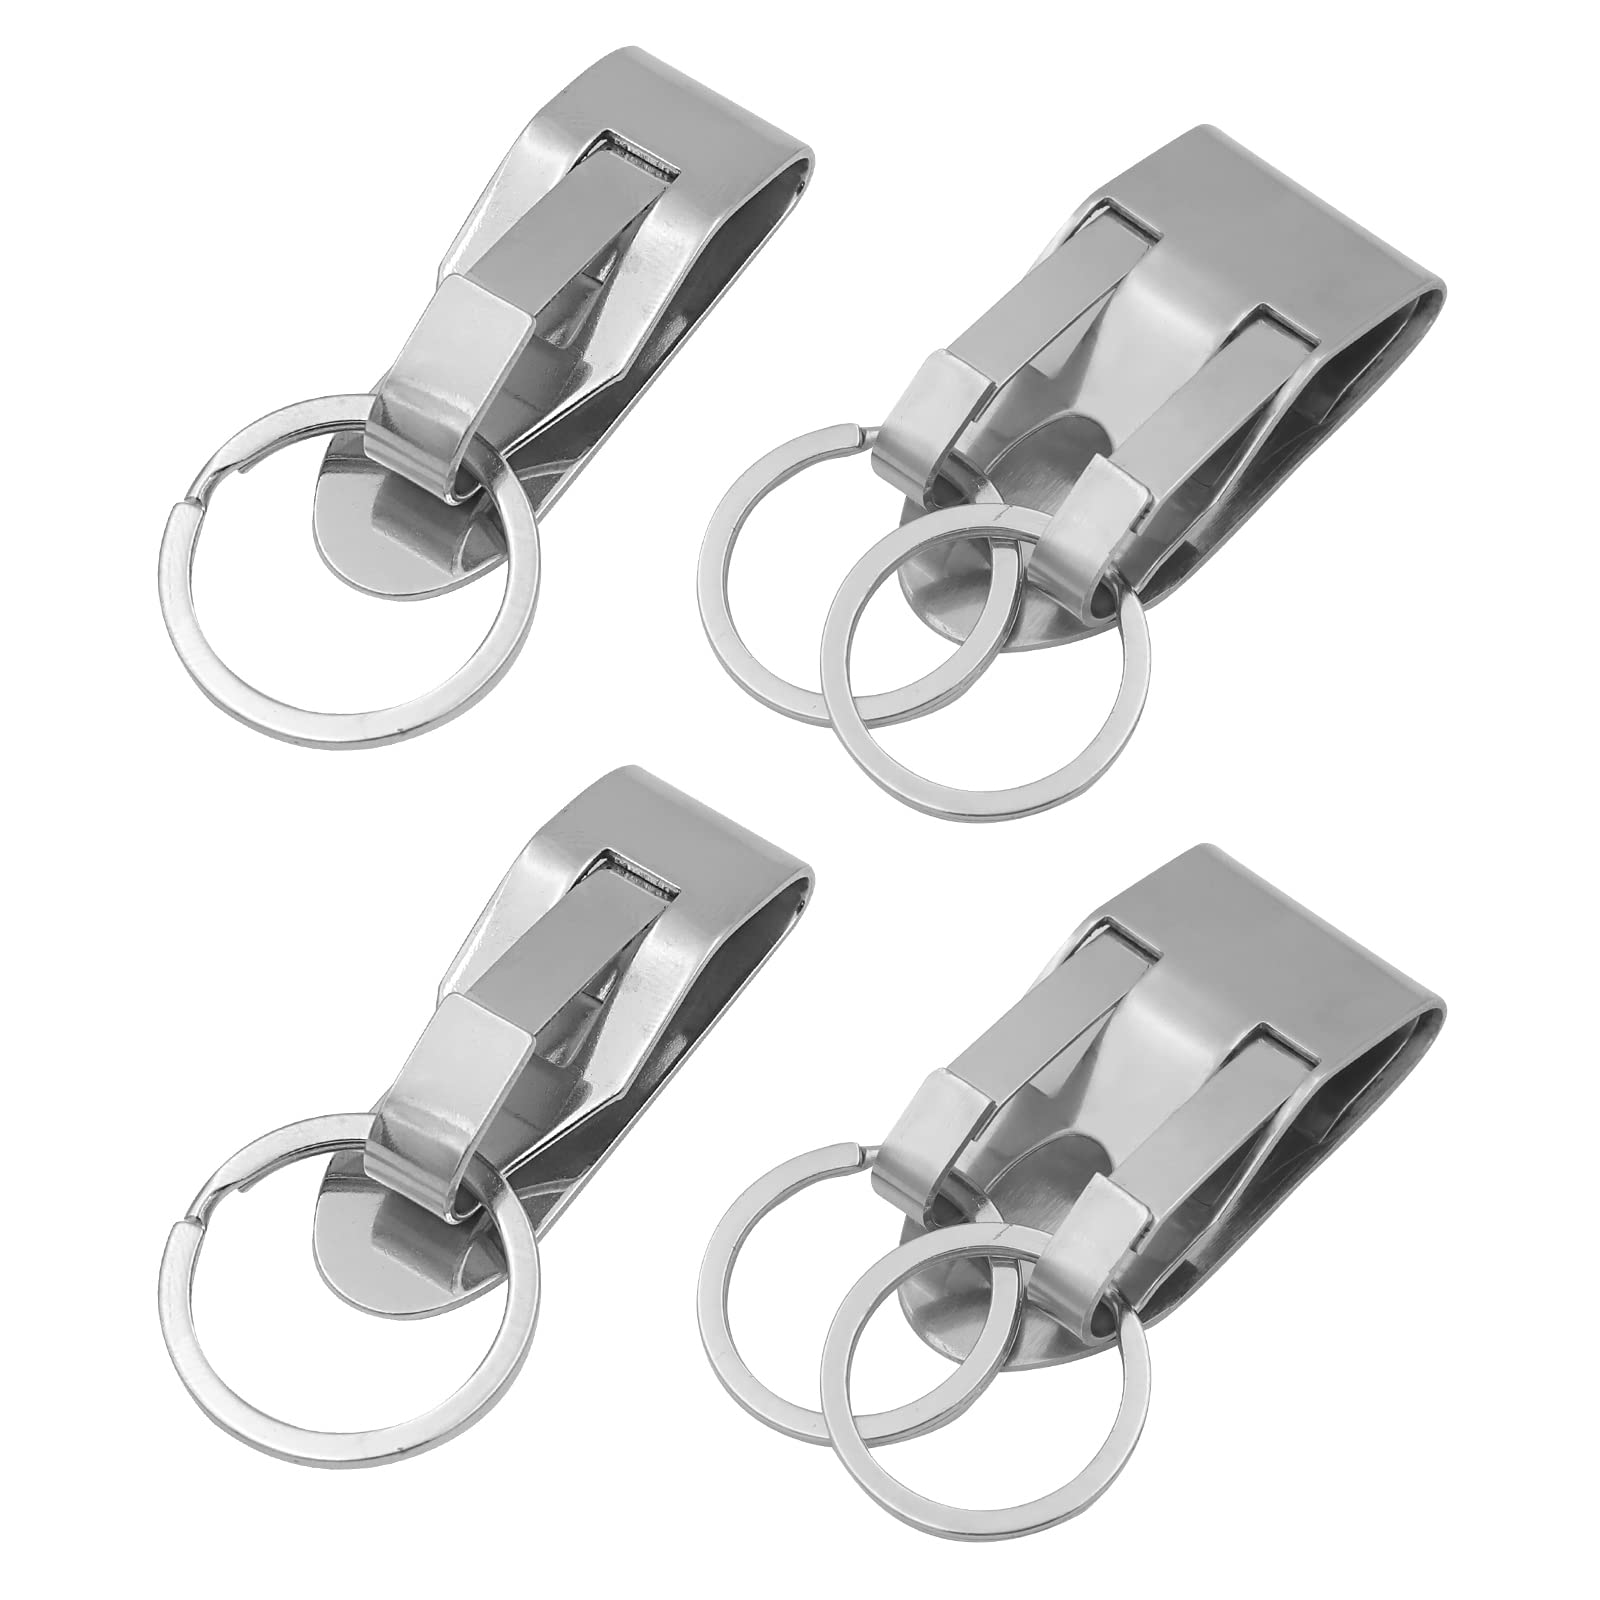 Dongzhur 4 Pcs Belt Key Holder Clips, Stainless Steel Security Belt Clip Keychain, Quick Release Clip-On Holder with Detachable Key Ring, Heavy Duty